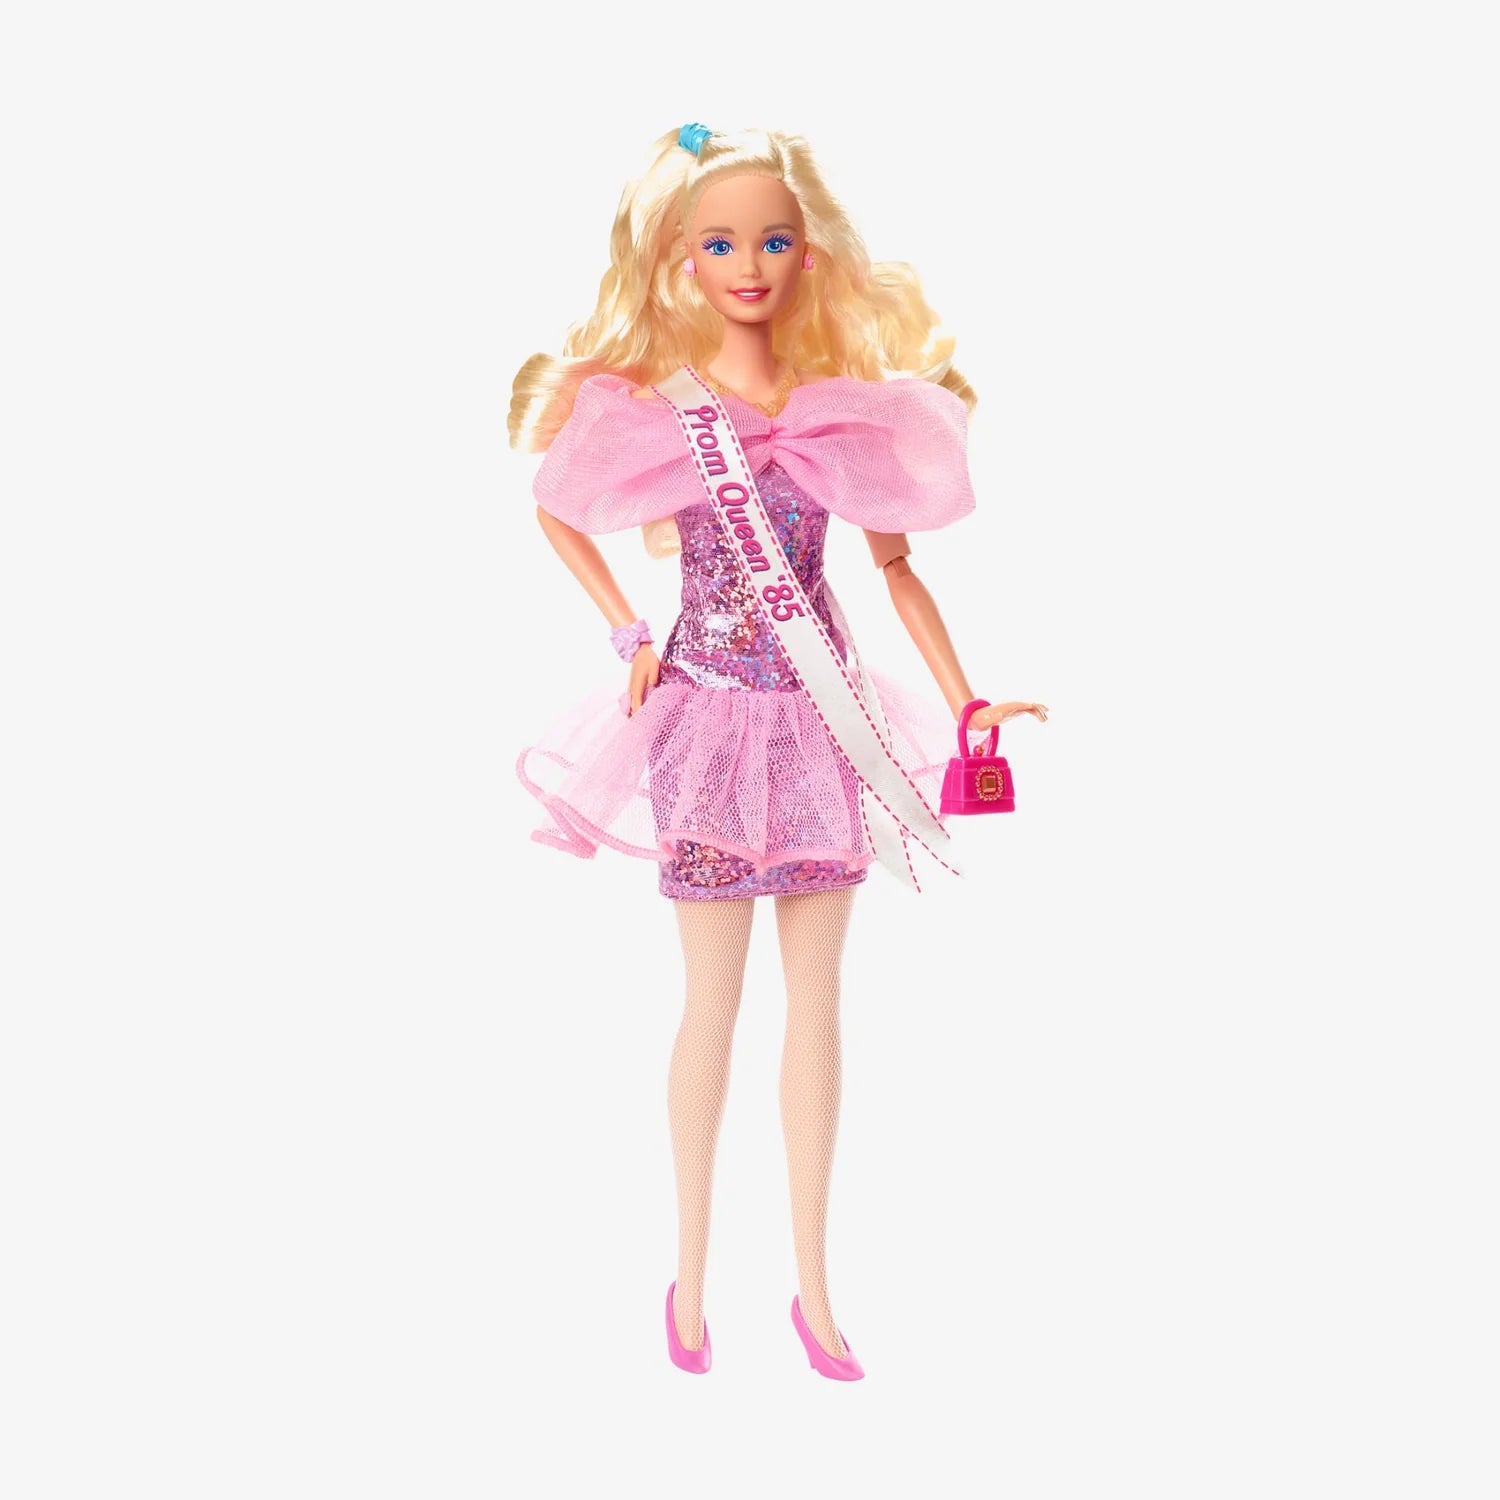 Barbie Signature Barbie Rewind Doll – Prom Night - BumbleToys - 5-7 Years, 8+ Years, Barbie, Fashion Dolls & Accessories, Girls, Pre-Order